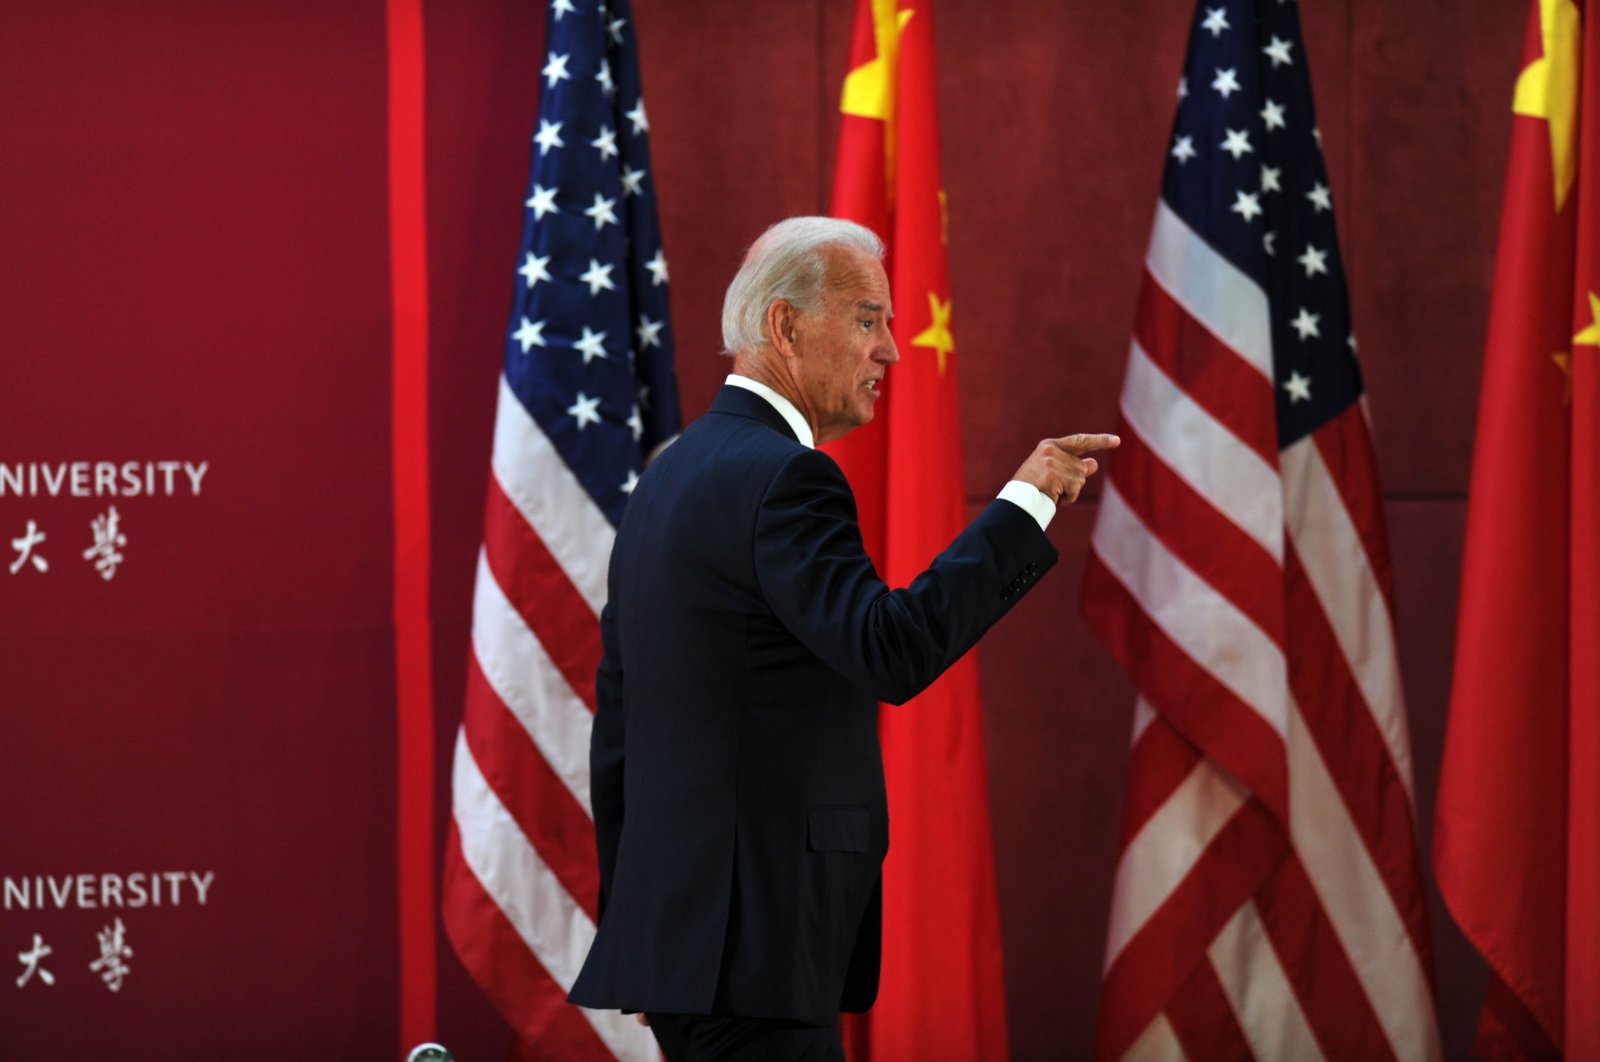 Then-U.S. Vice President Joe Biden gives a lecture at Sichuan University during his visit to China, in Chengdu, Sichuan, China, Aug. 21, 2011. (Photo by Getty Images)